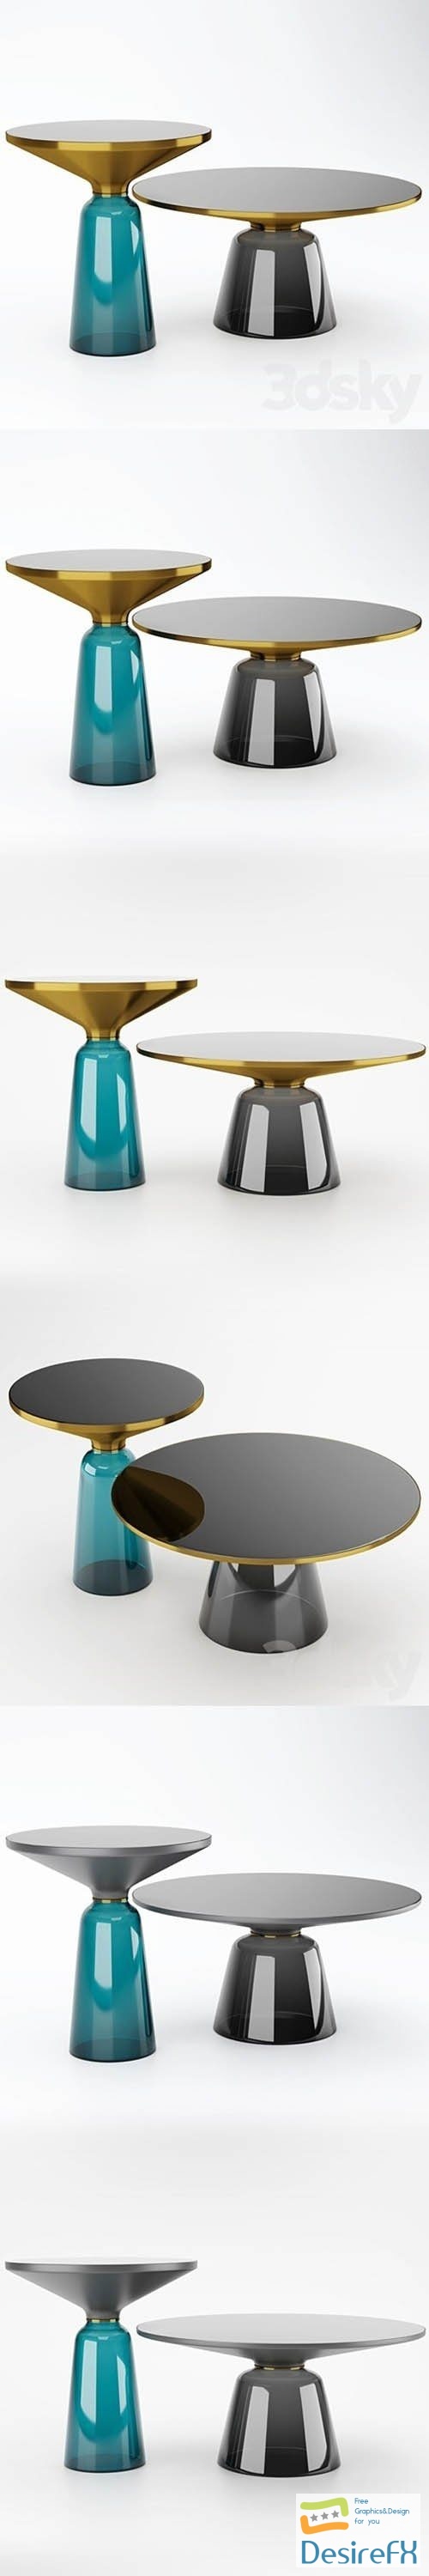 Coffee table LaLume Bell - 3d model